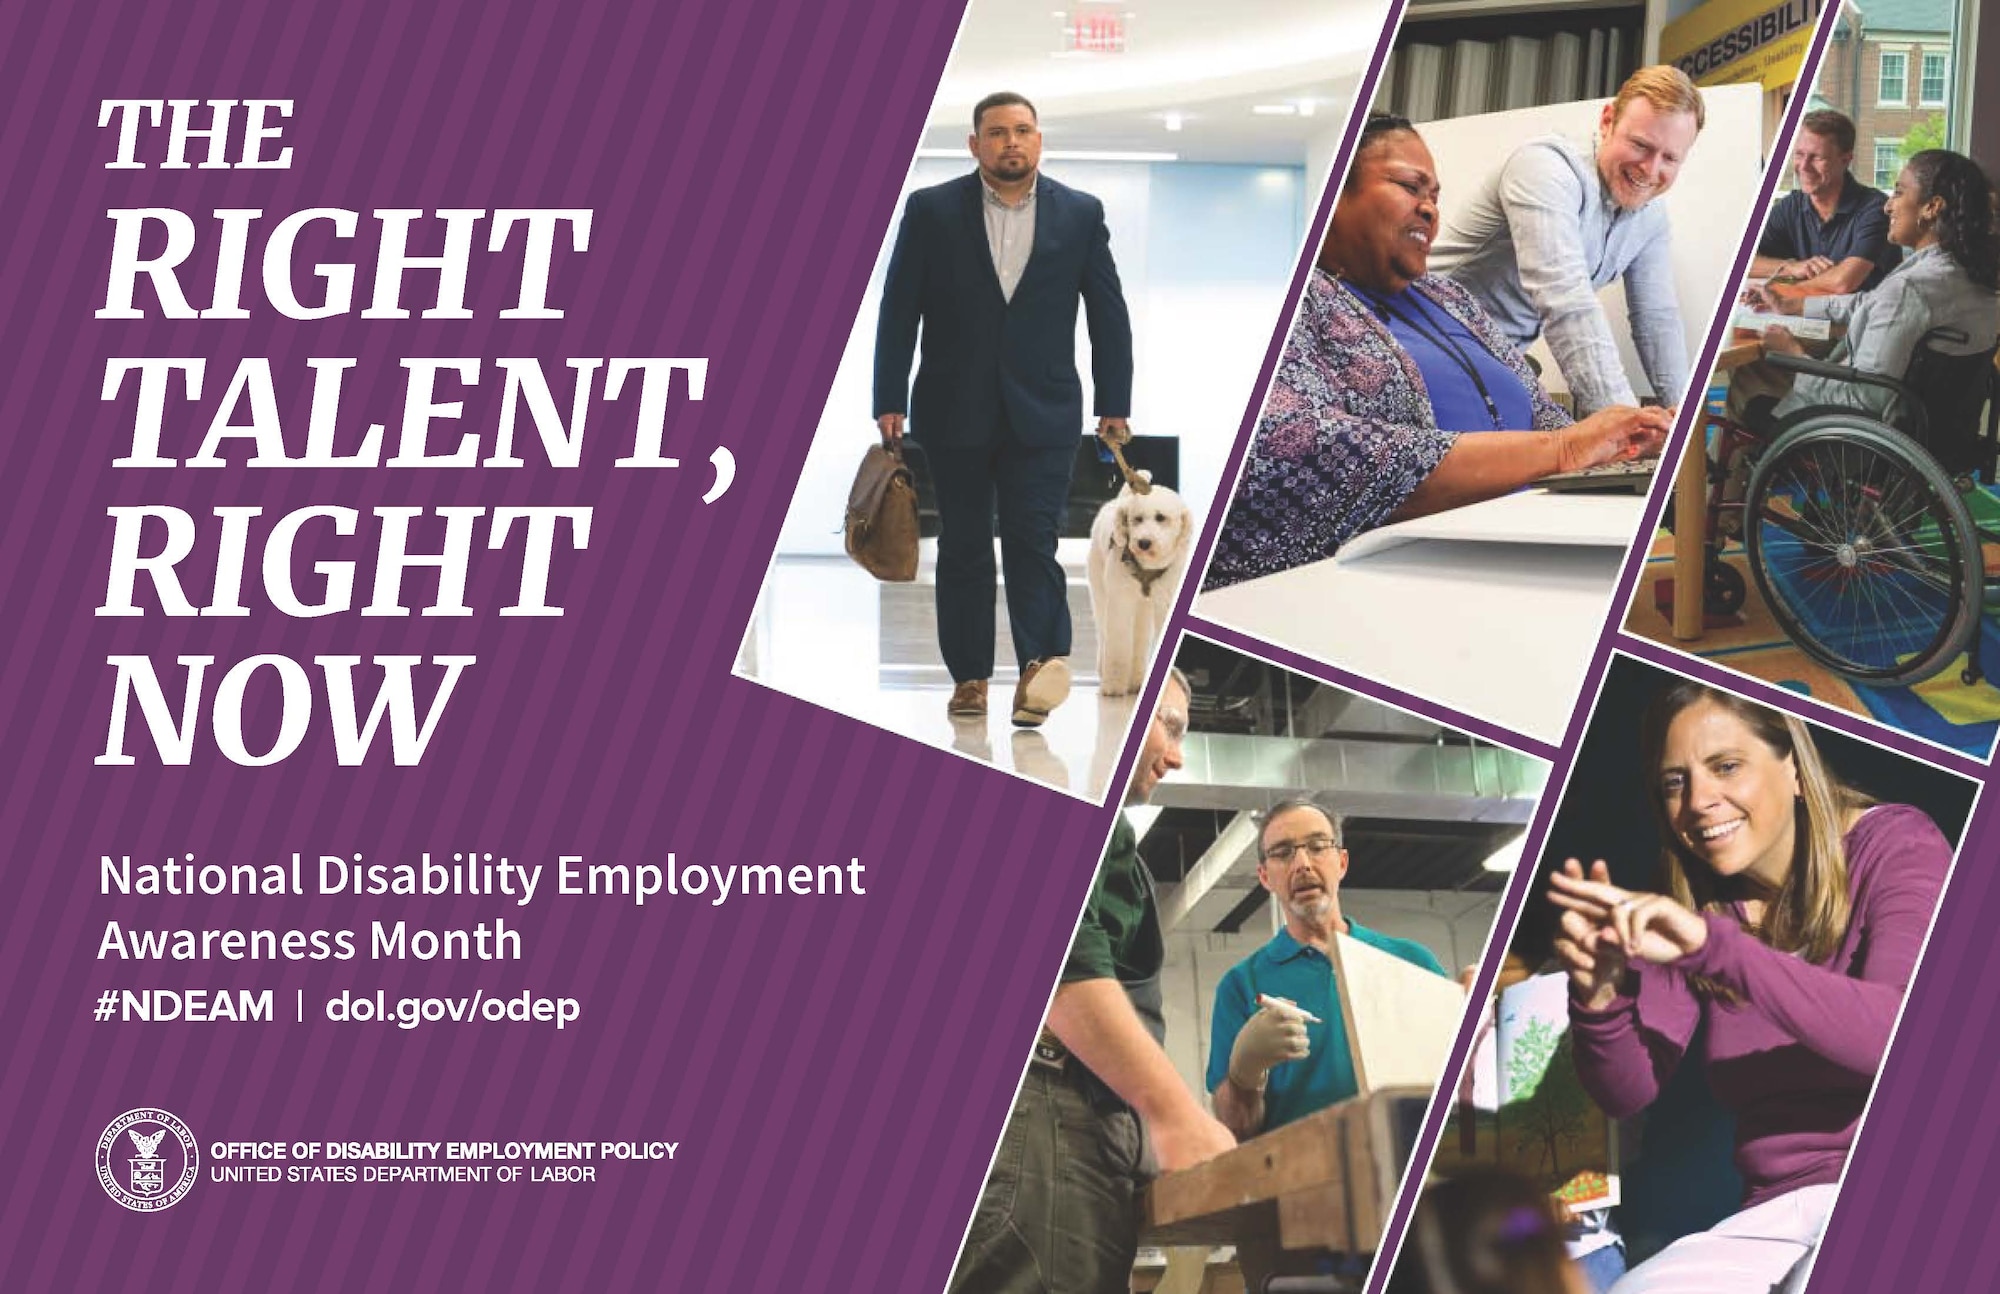 National Disability Employment Awareness Month is a nationally recognized awareness campaign.